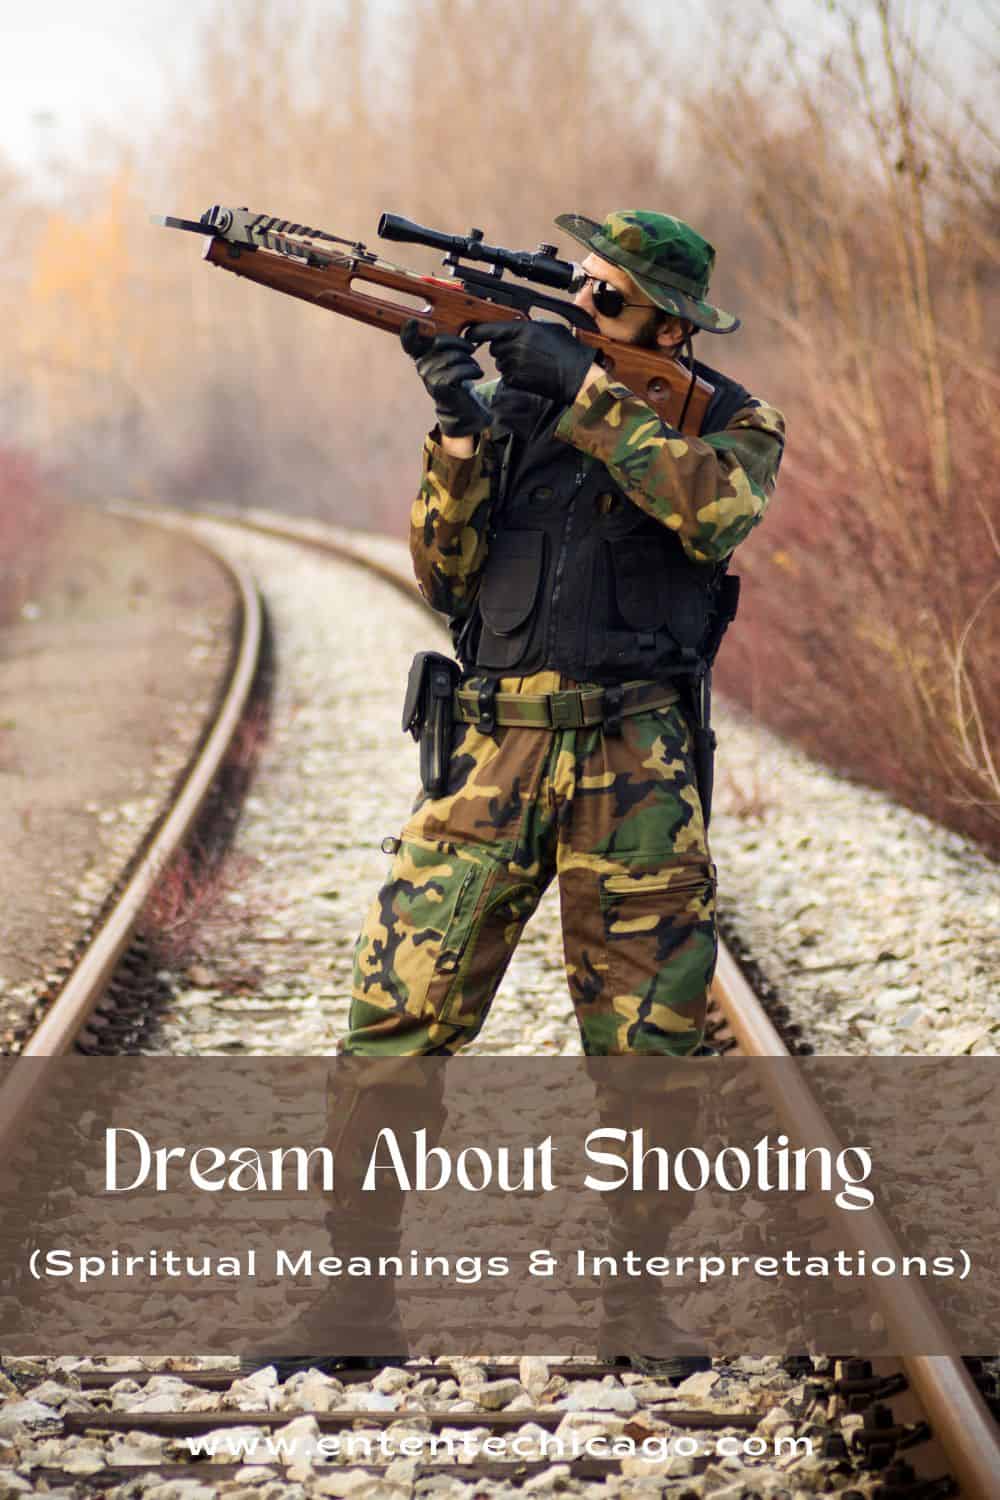 Dream About Shooting (Spiritual Meanings & Interpretations)